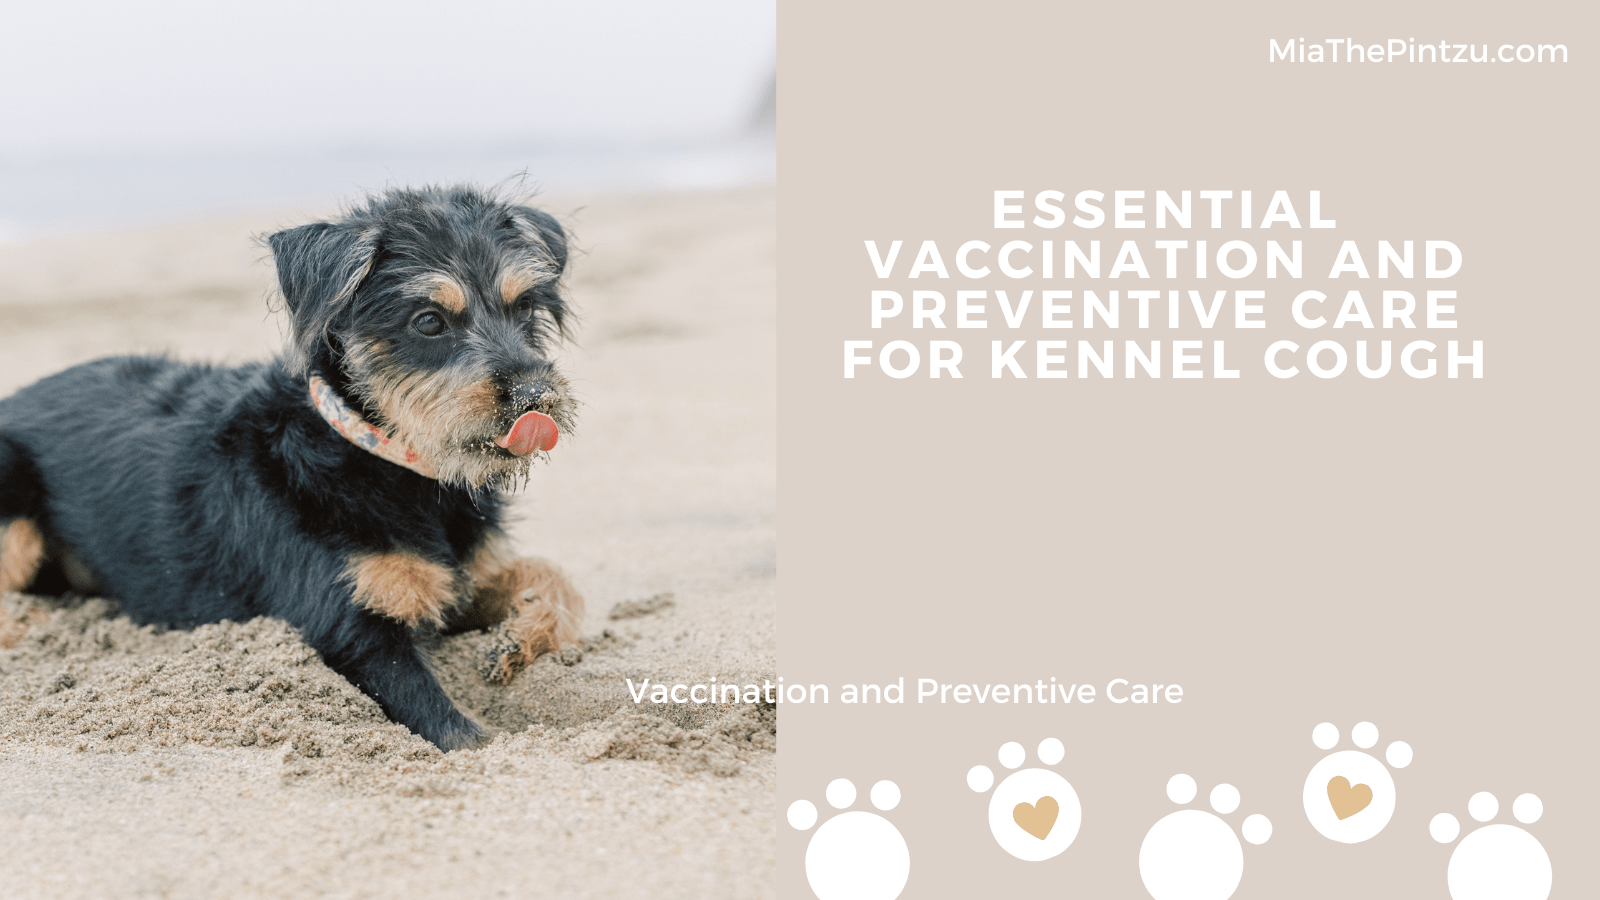 Essential Vaccination and Preventive Care for Kennel Cough